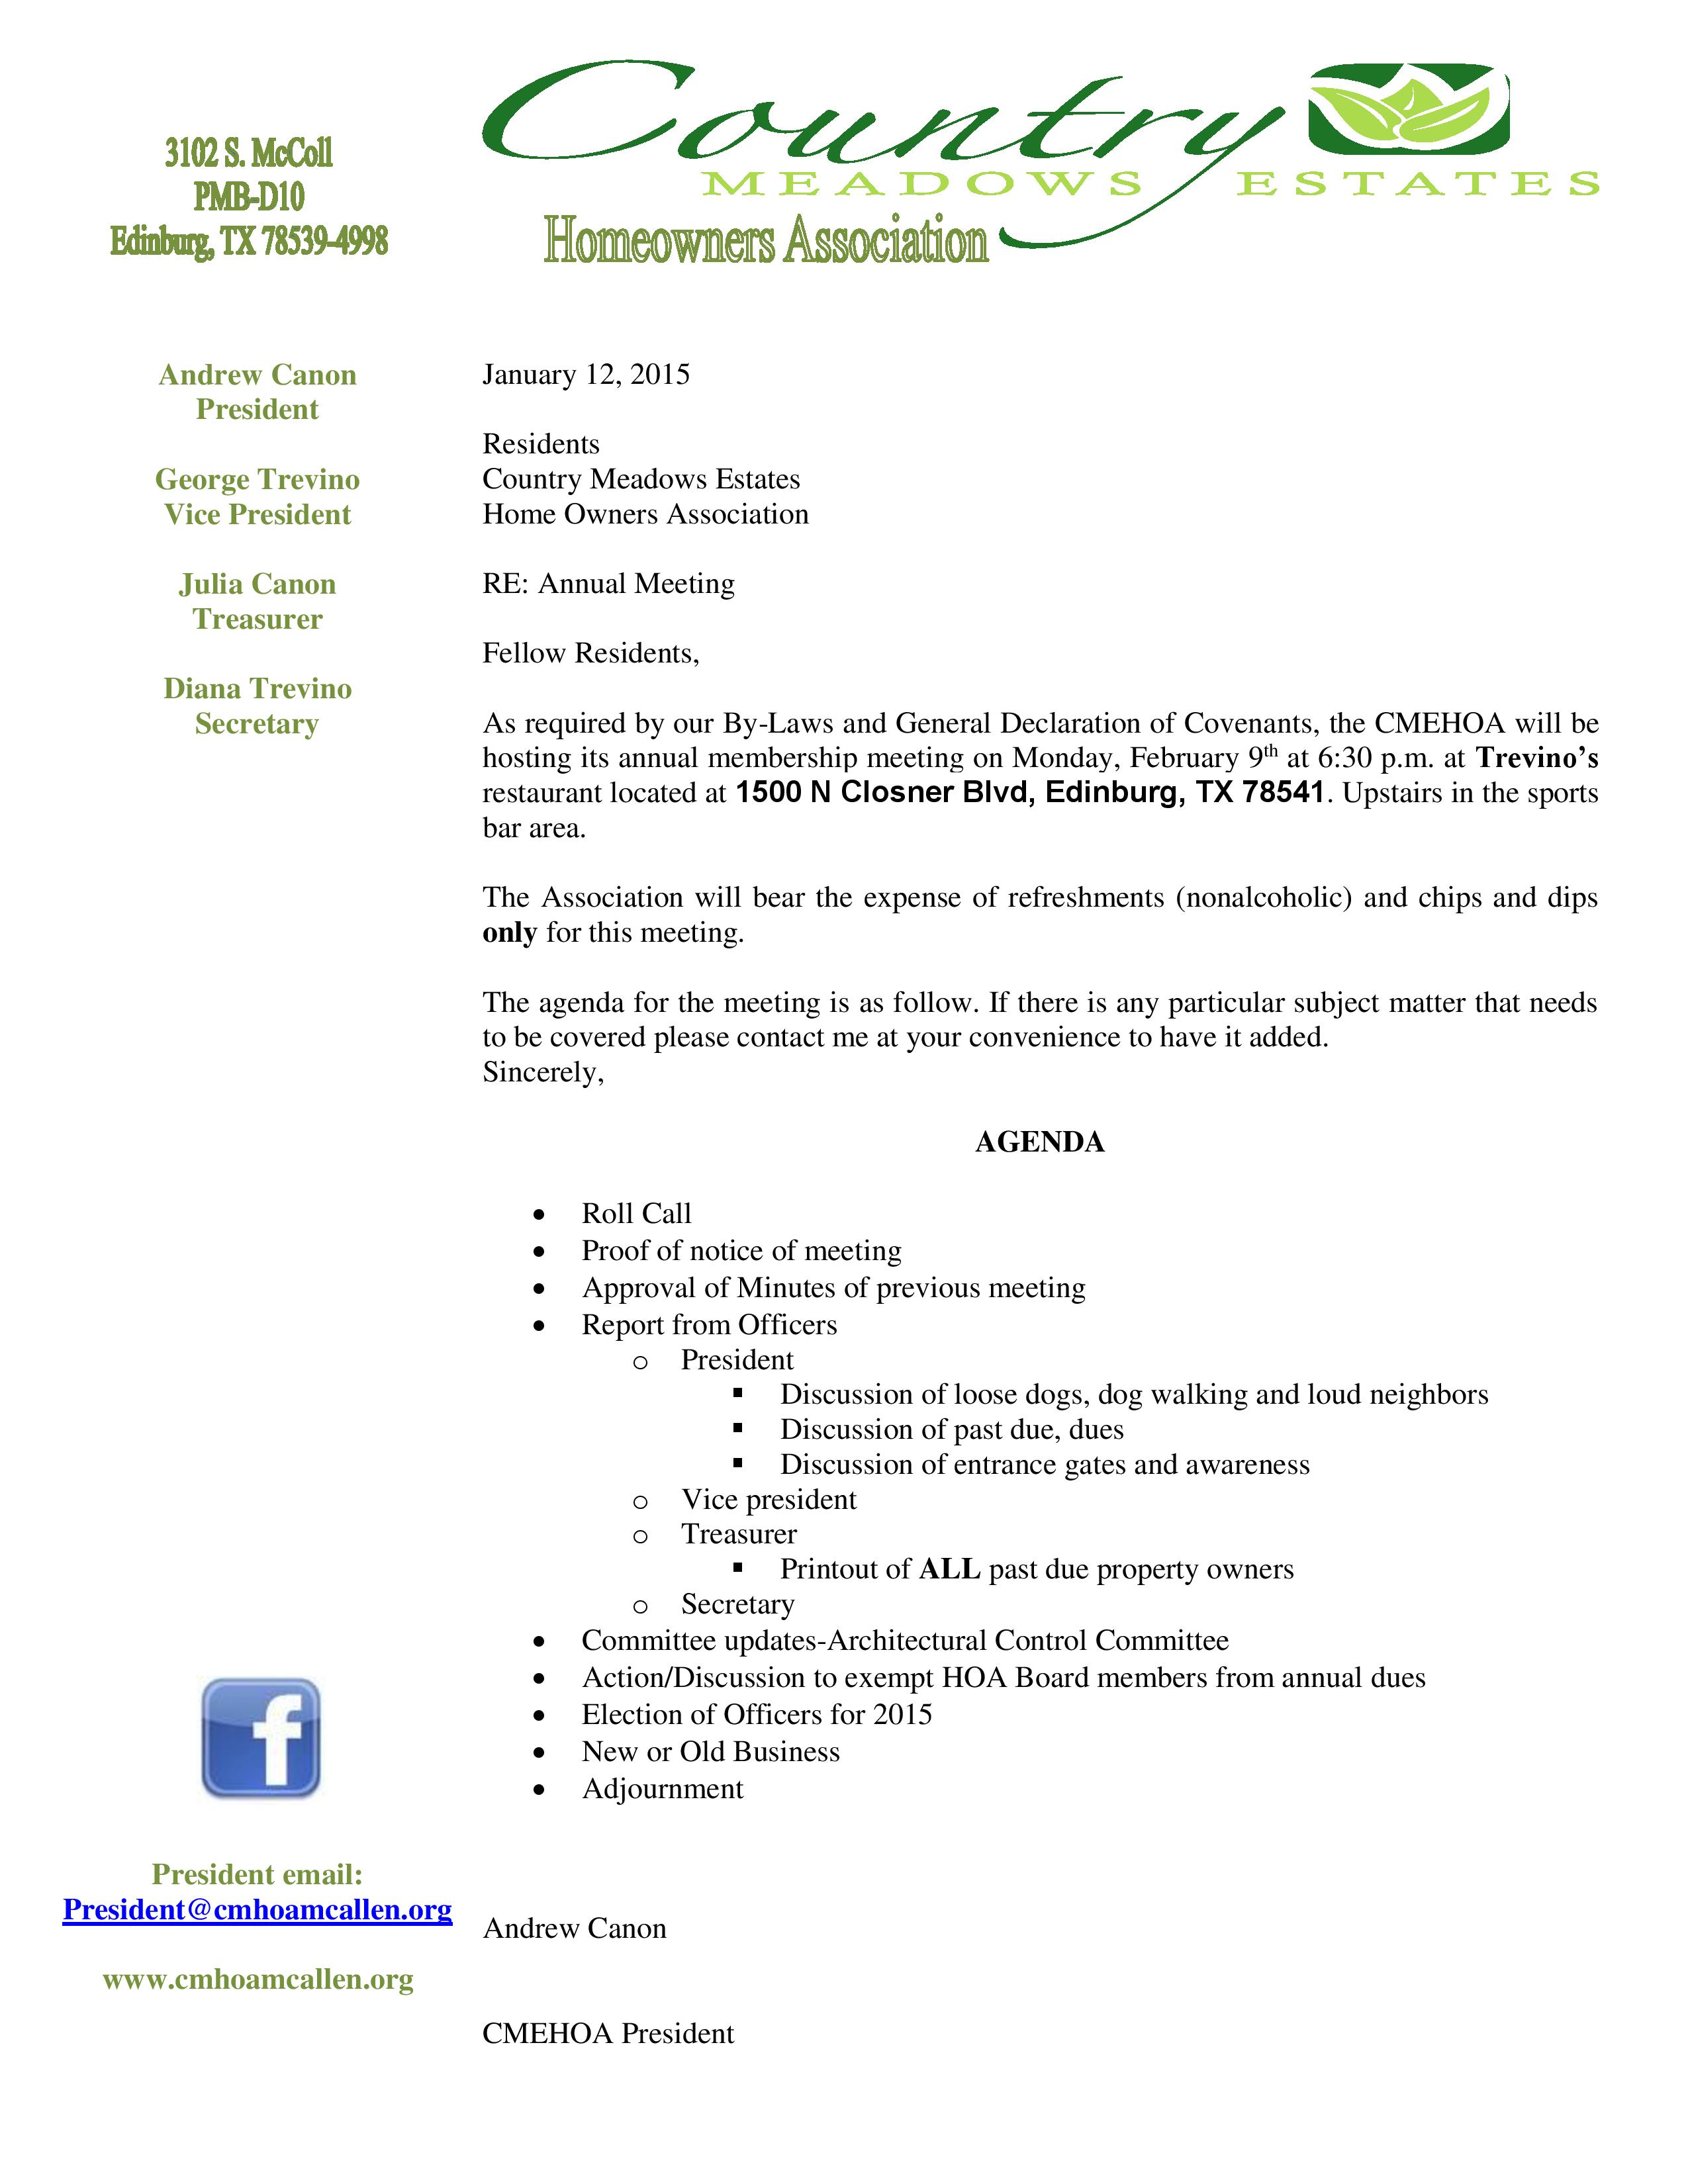 Hoa Annual Meeting Notice Template from cmhoamcallen.org